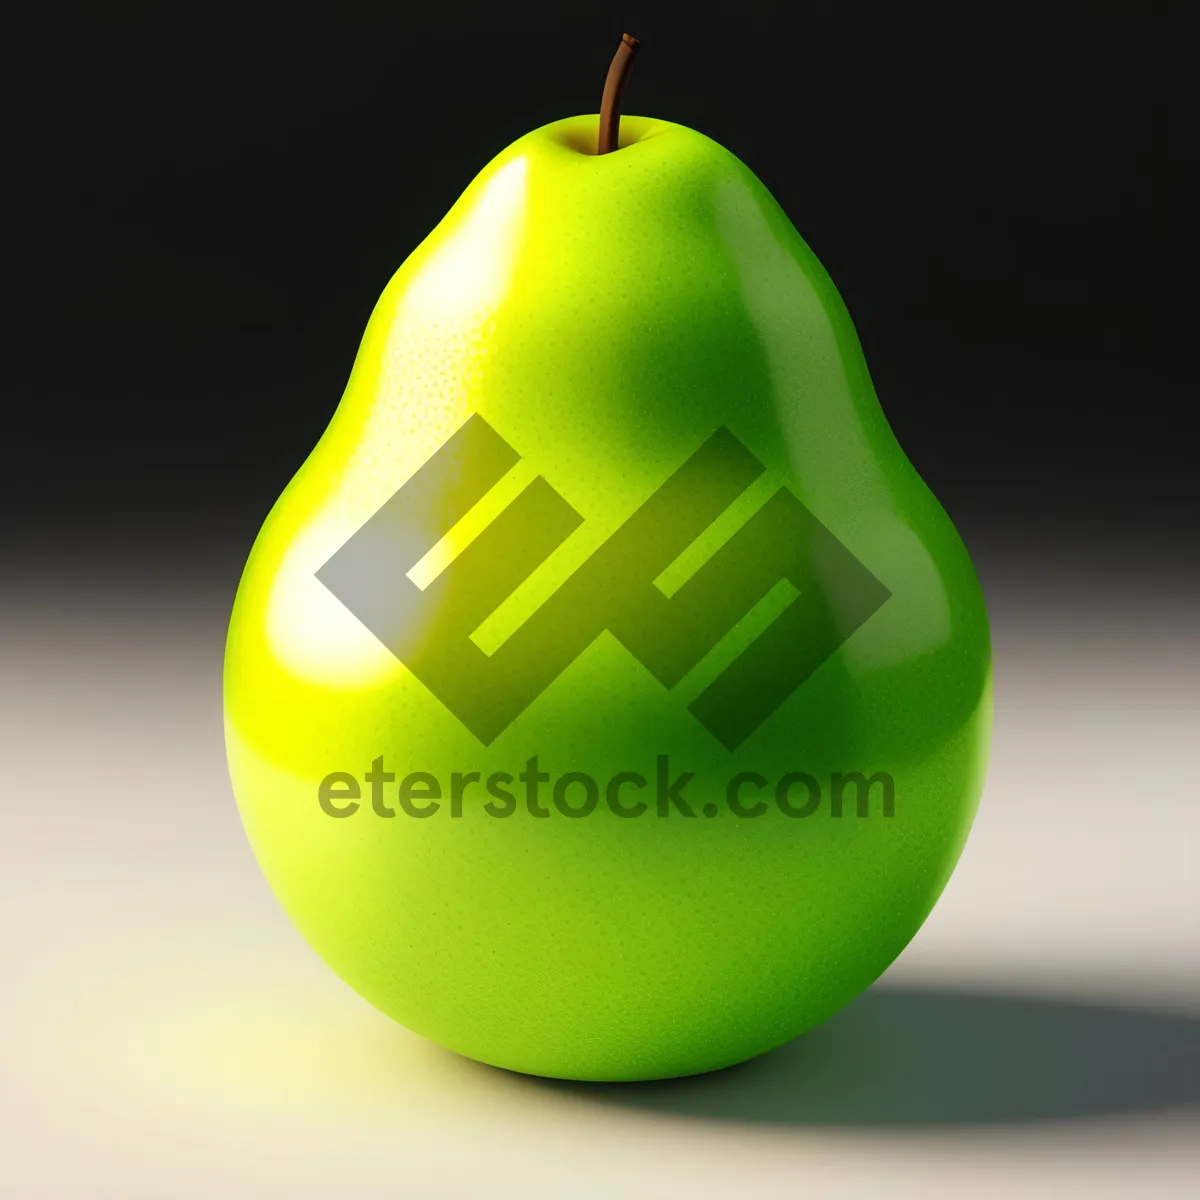 Picture of Juicy Apple - Fresh, Healthy, and Delicious